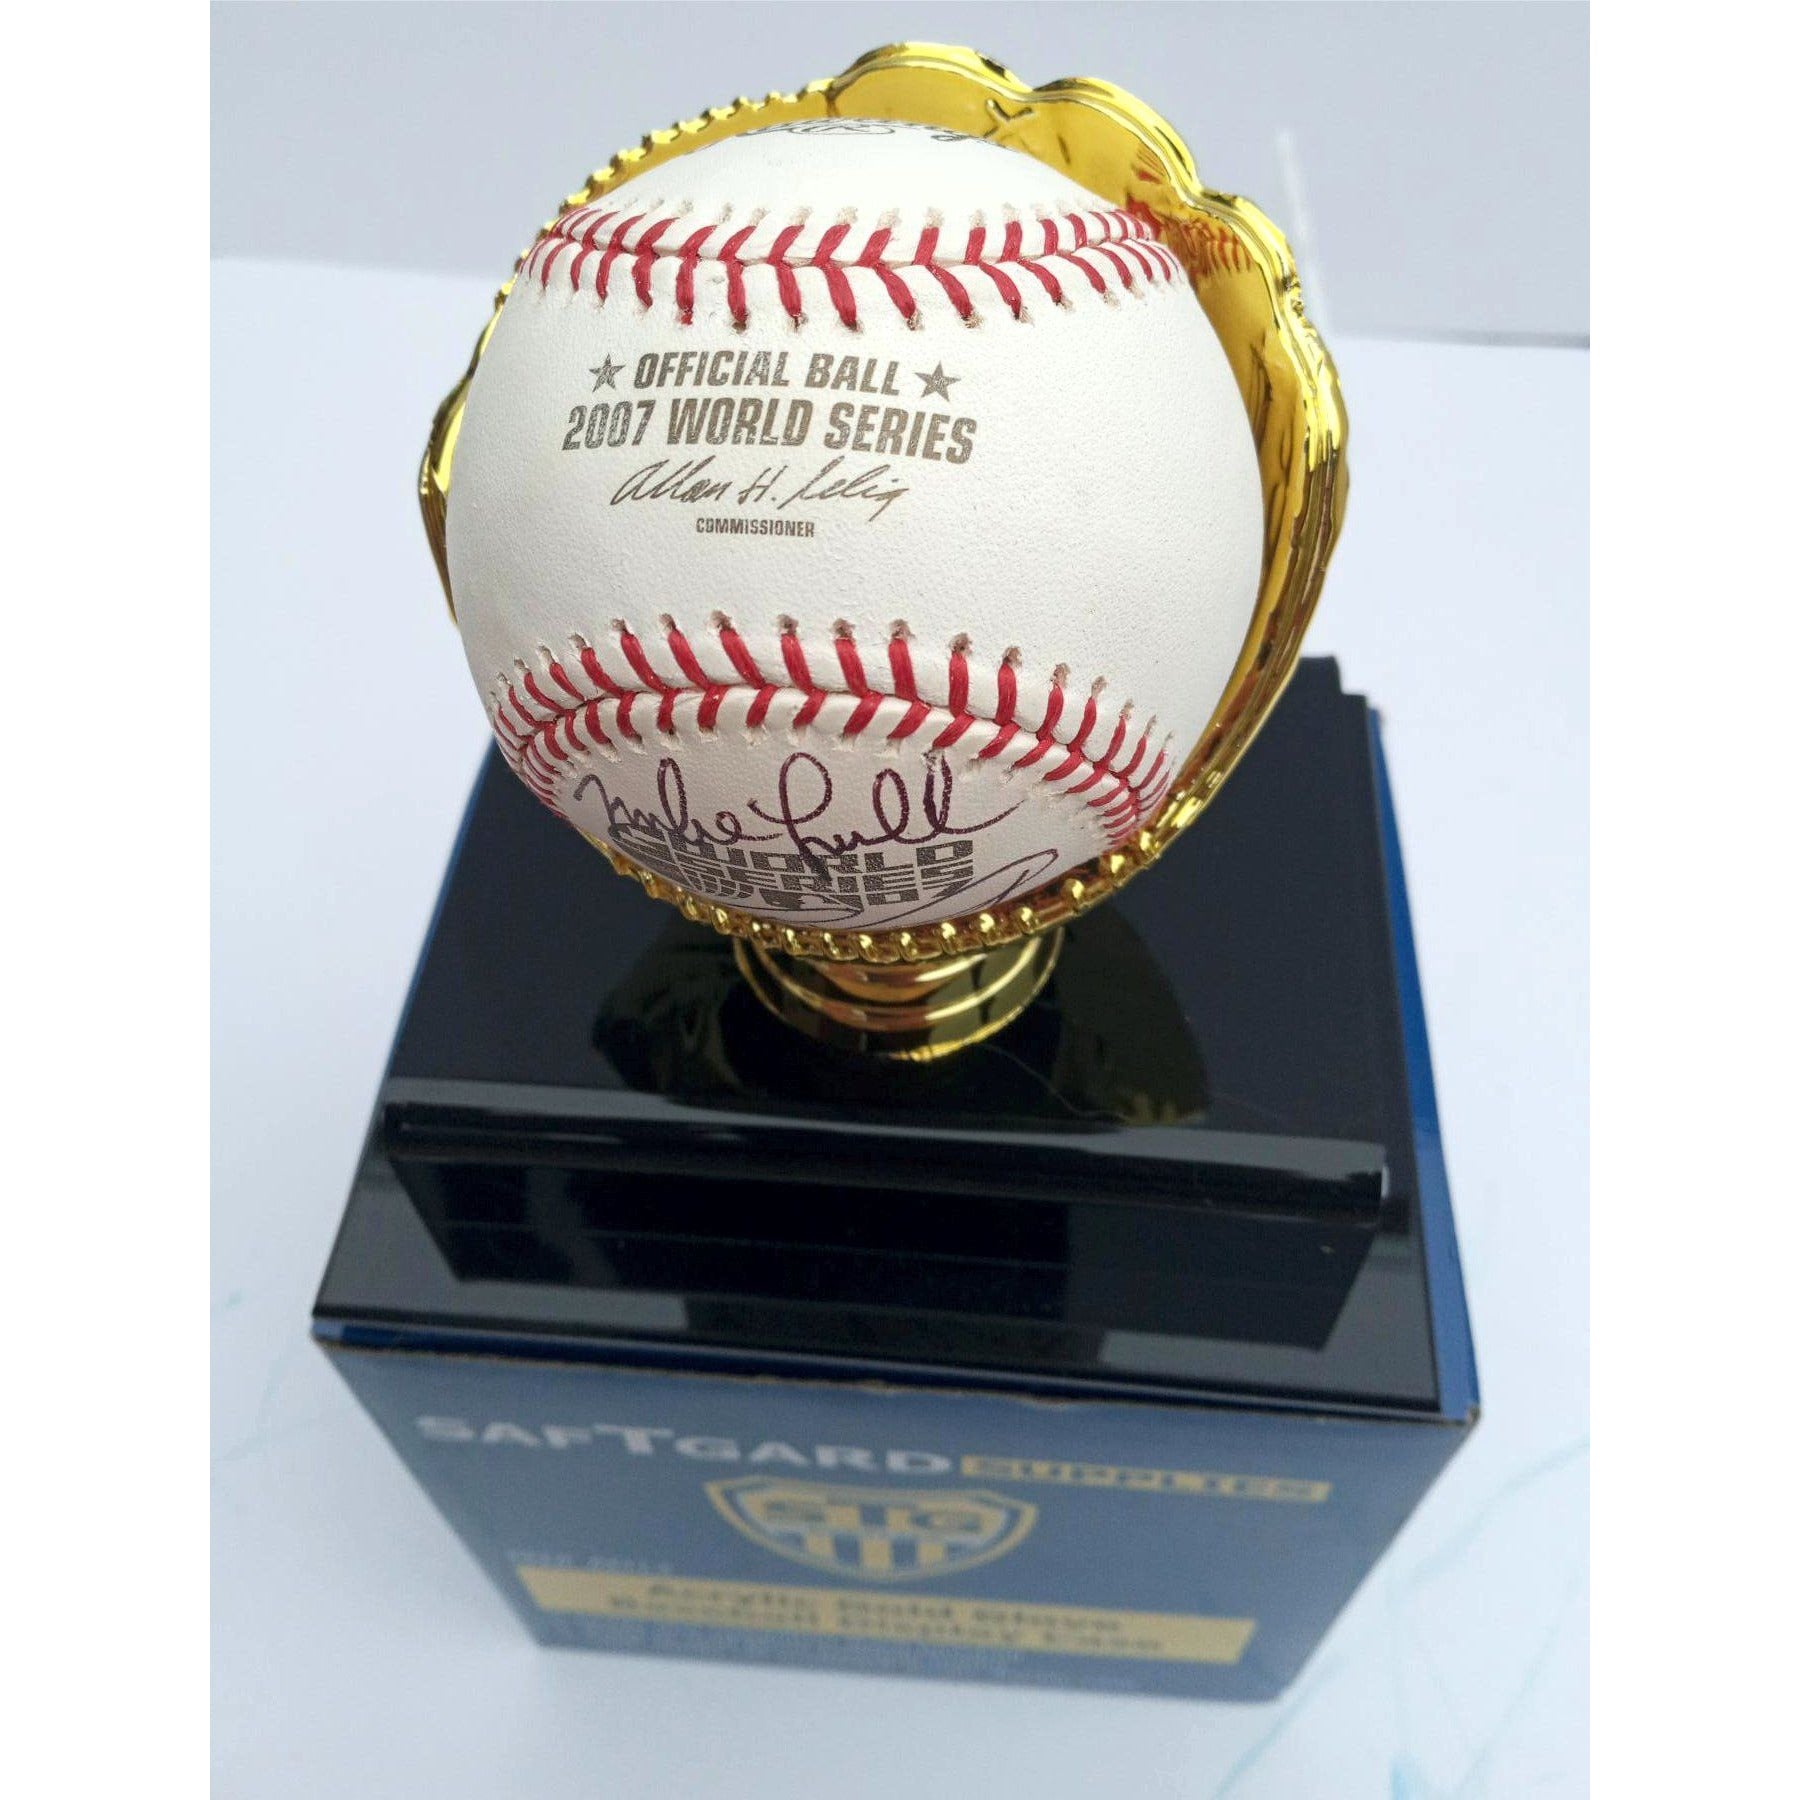 David Ortiz Curt Schilling Dustin Pedroia Mike Lowell Kevin Youkilis MLB baseball signed with proof with free case